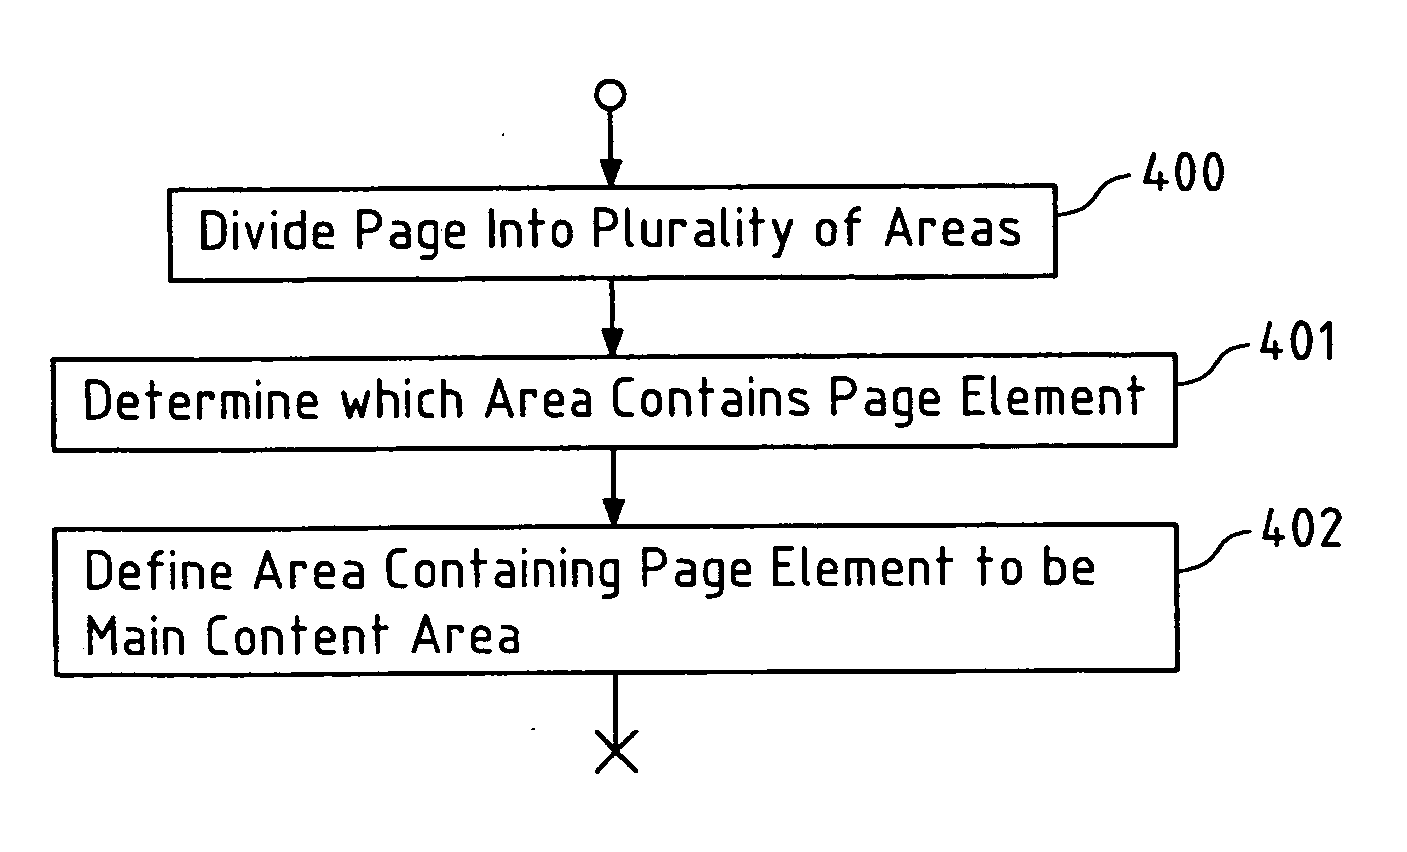 Determining a main content area of a page